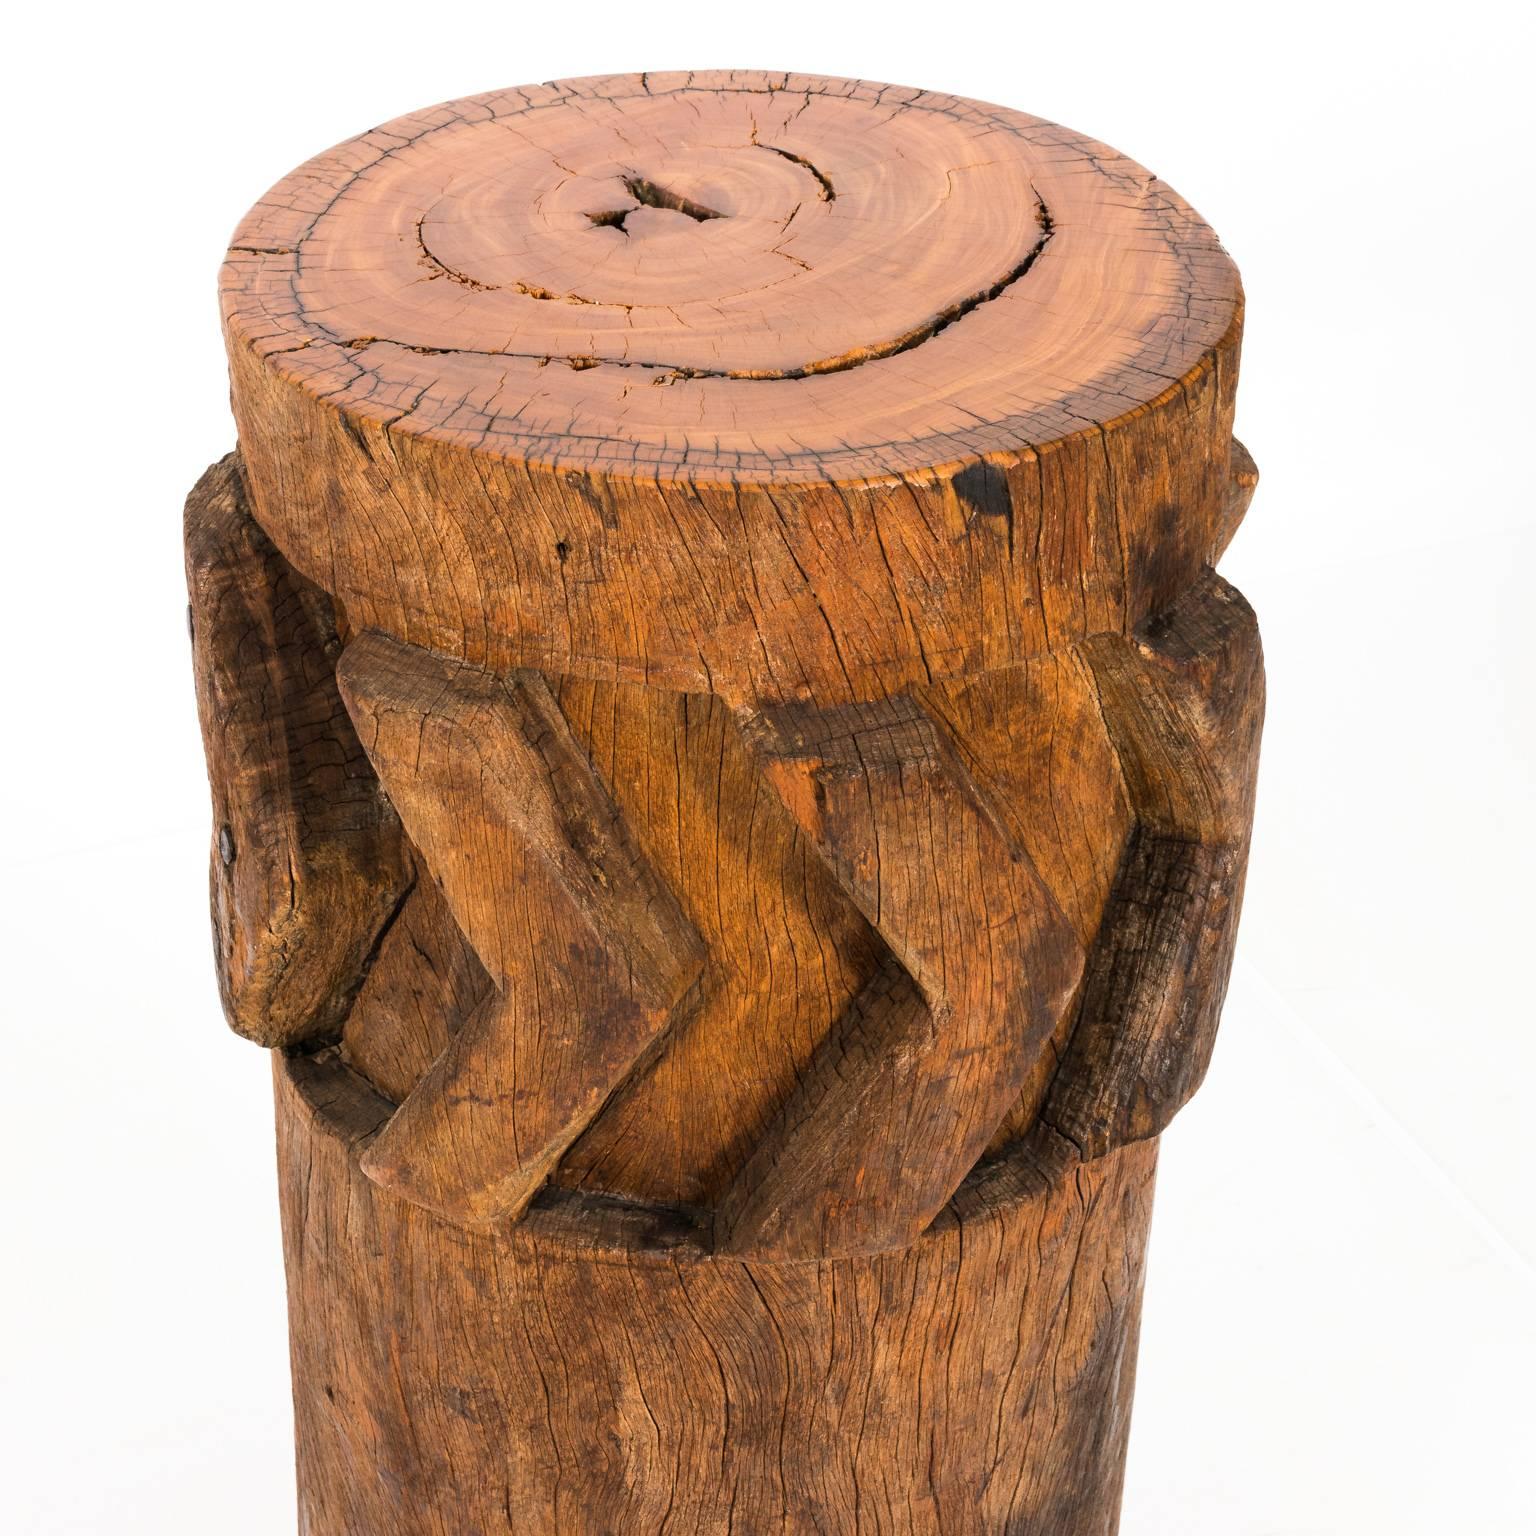 Early 20th century wooden African sugar grinders that can be utilized as a pedestal table in a rough-hewn finish.